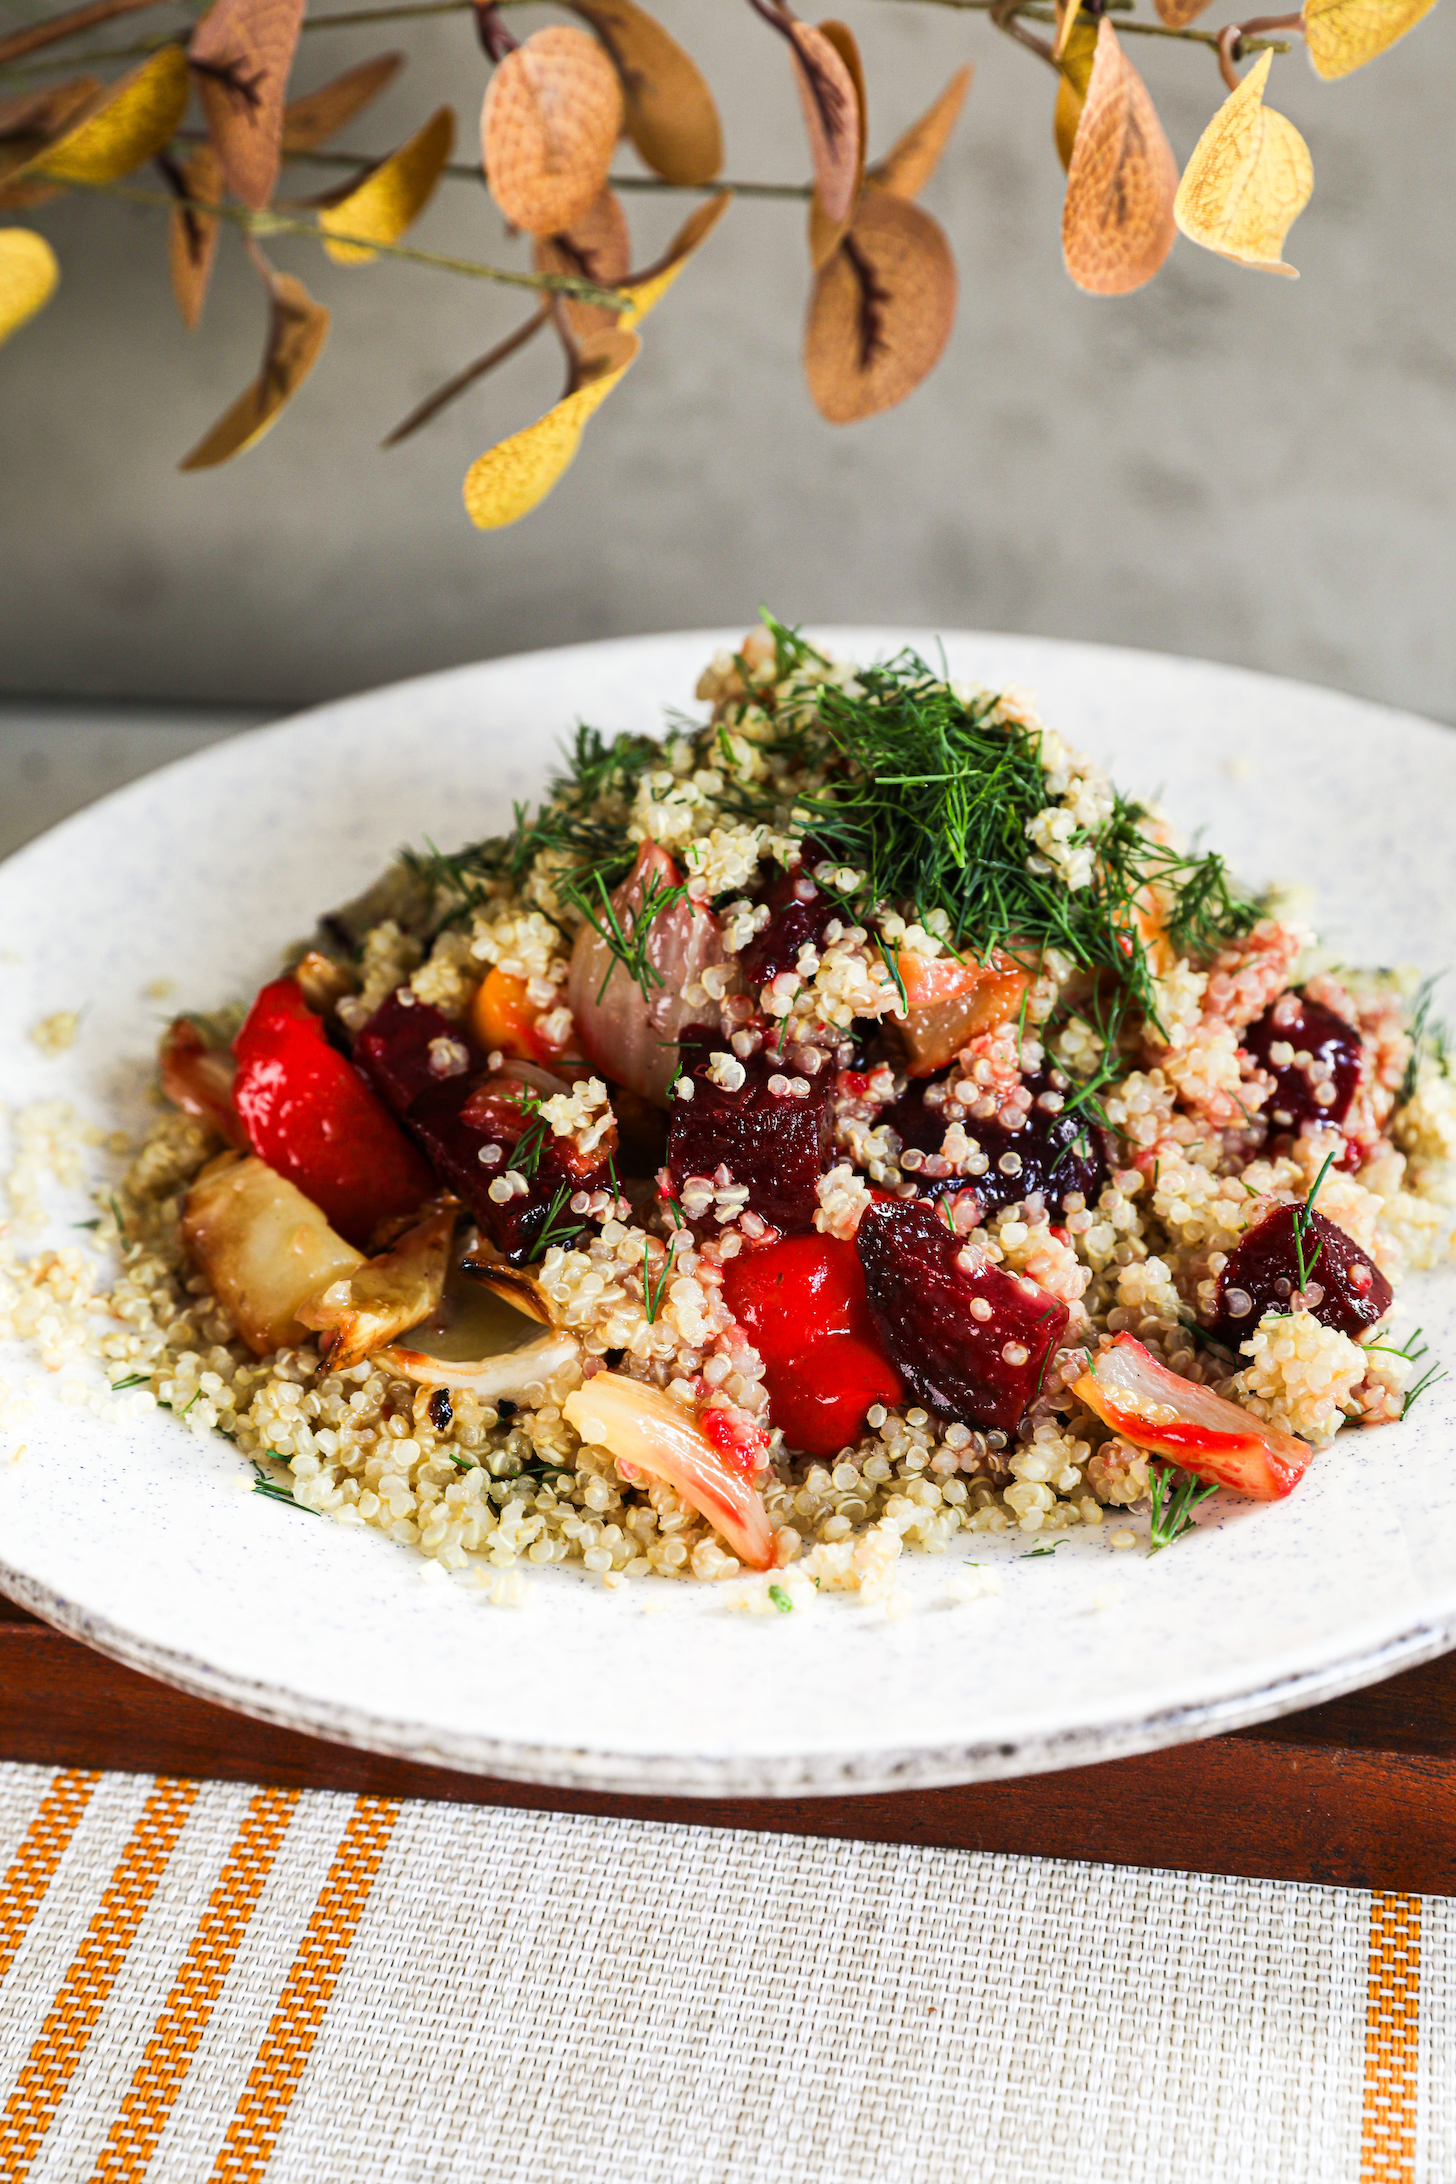 A plate of salad featuring a delightful mixture of quinoa, roasted beets, peppers, and fennel, topped with dill and doused in dressing.